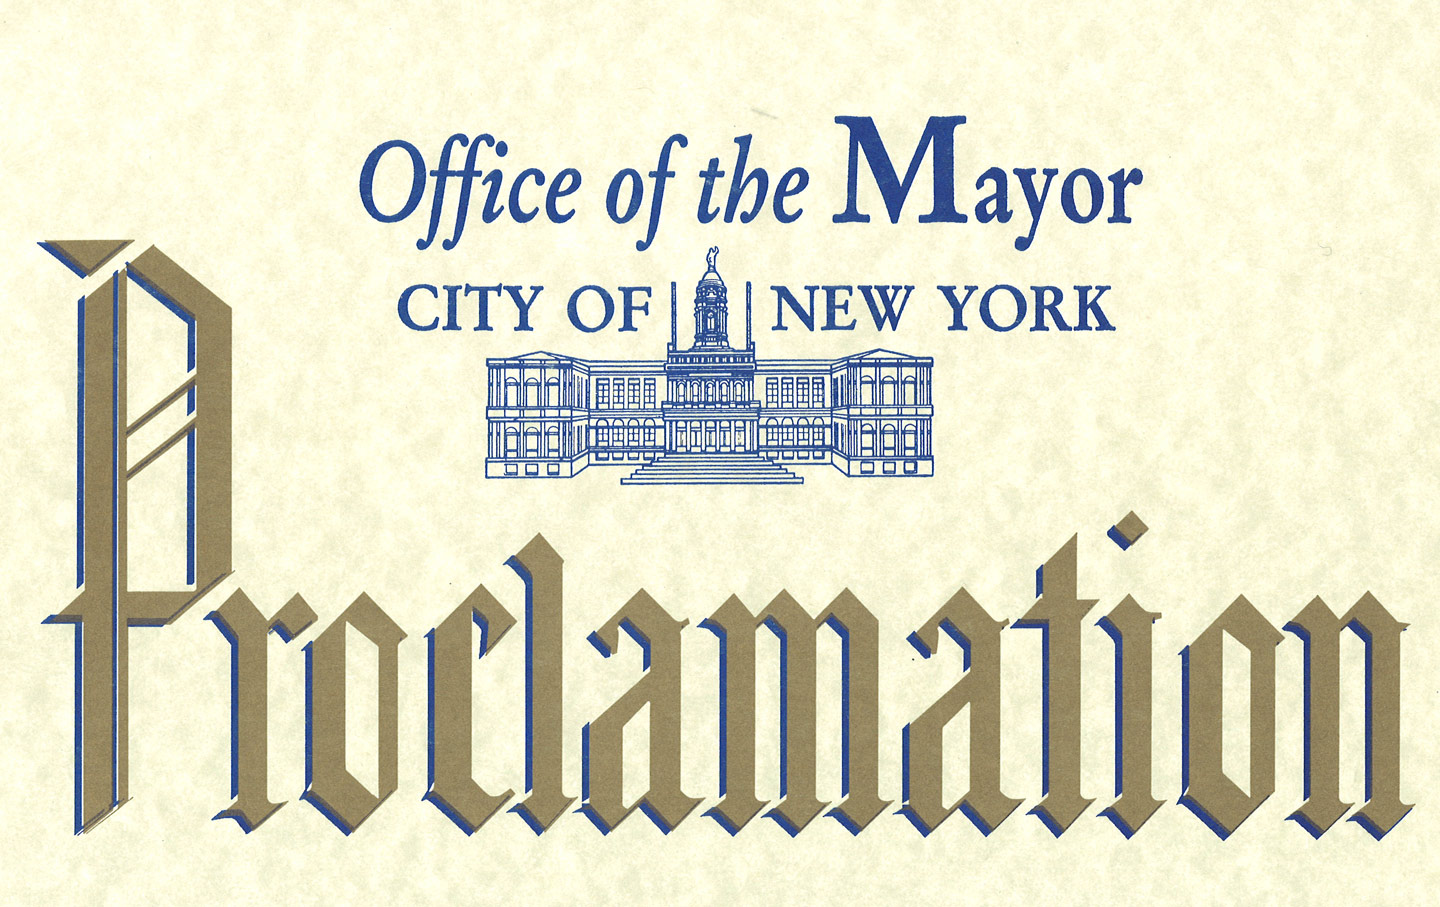 New York Nation Day Proclamation